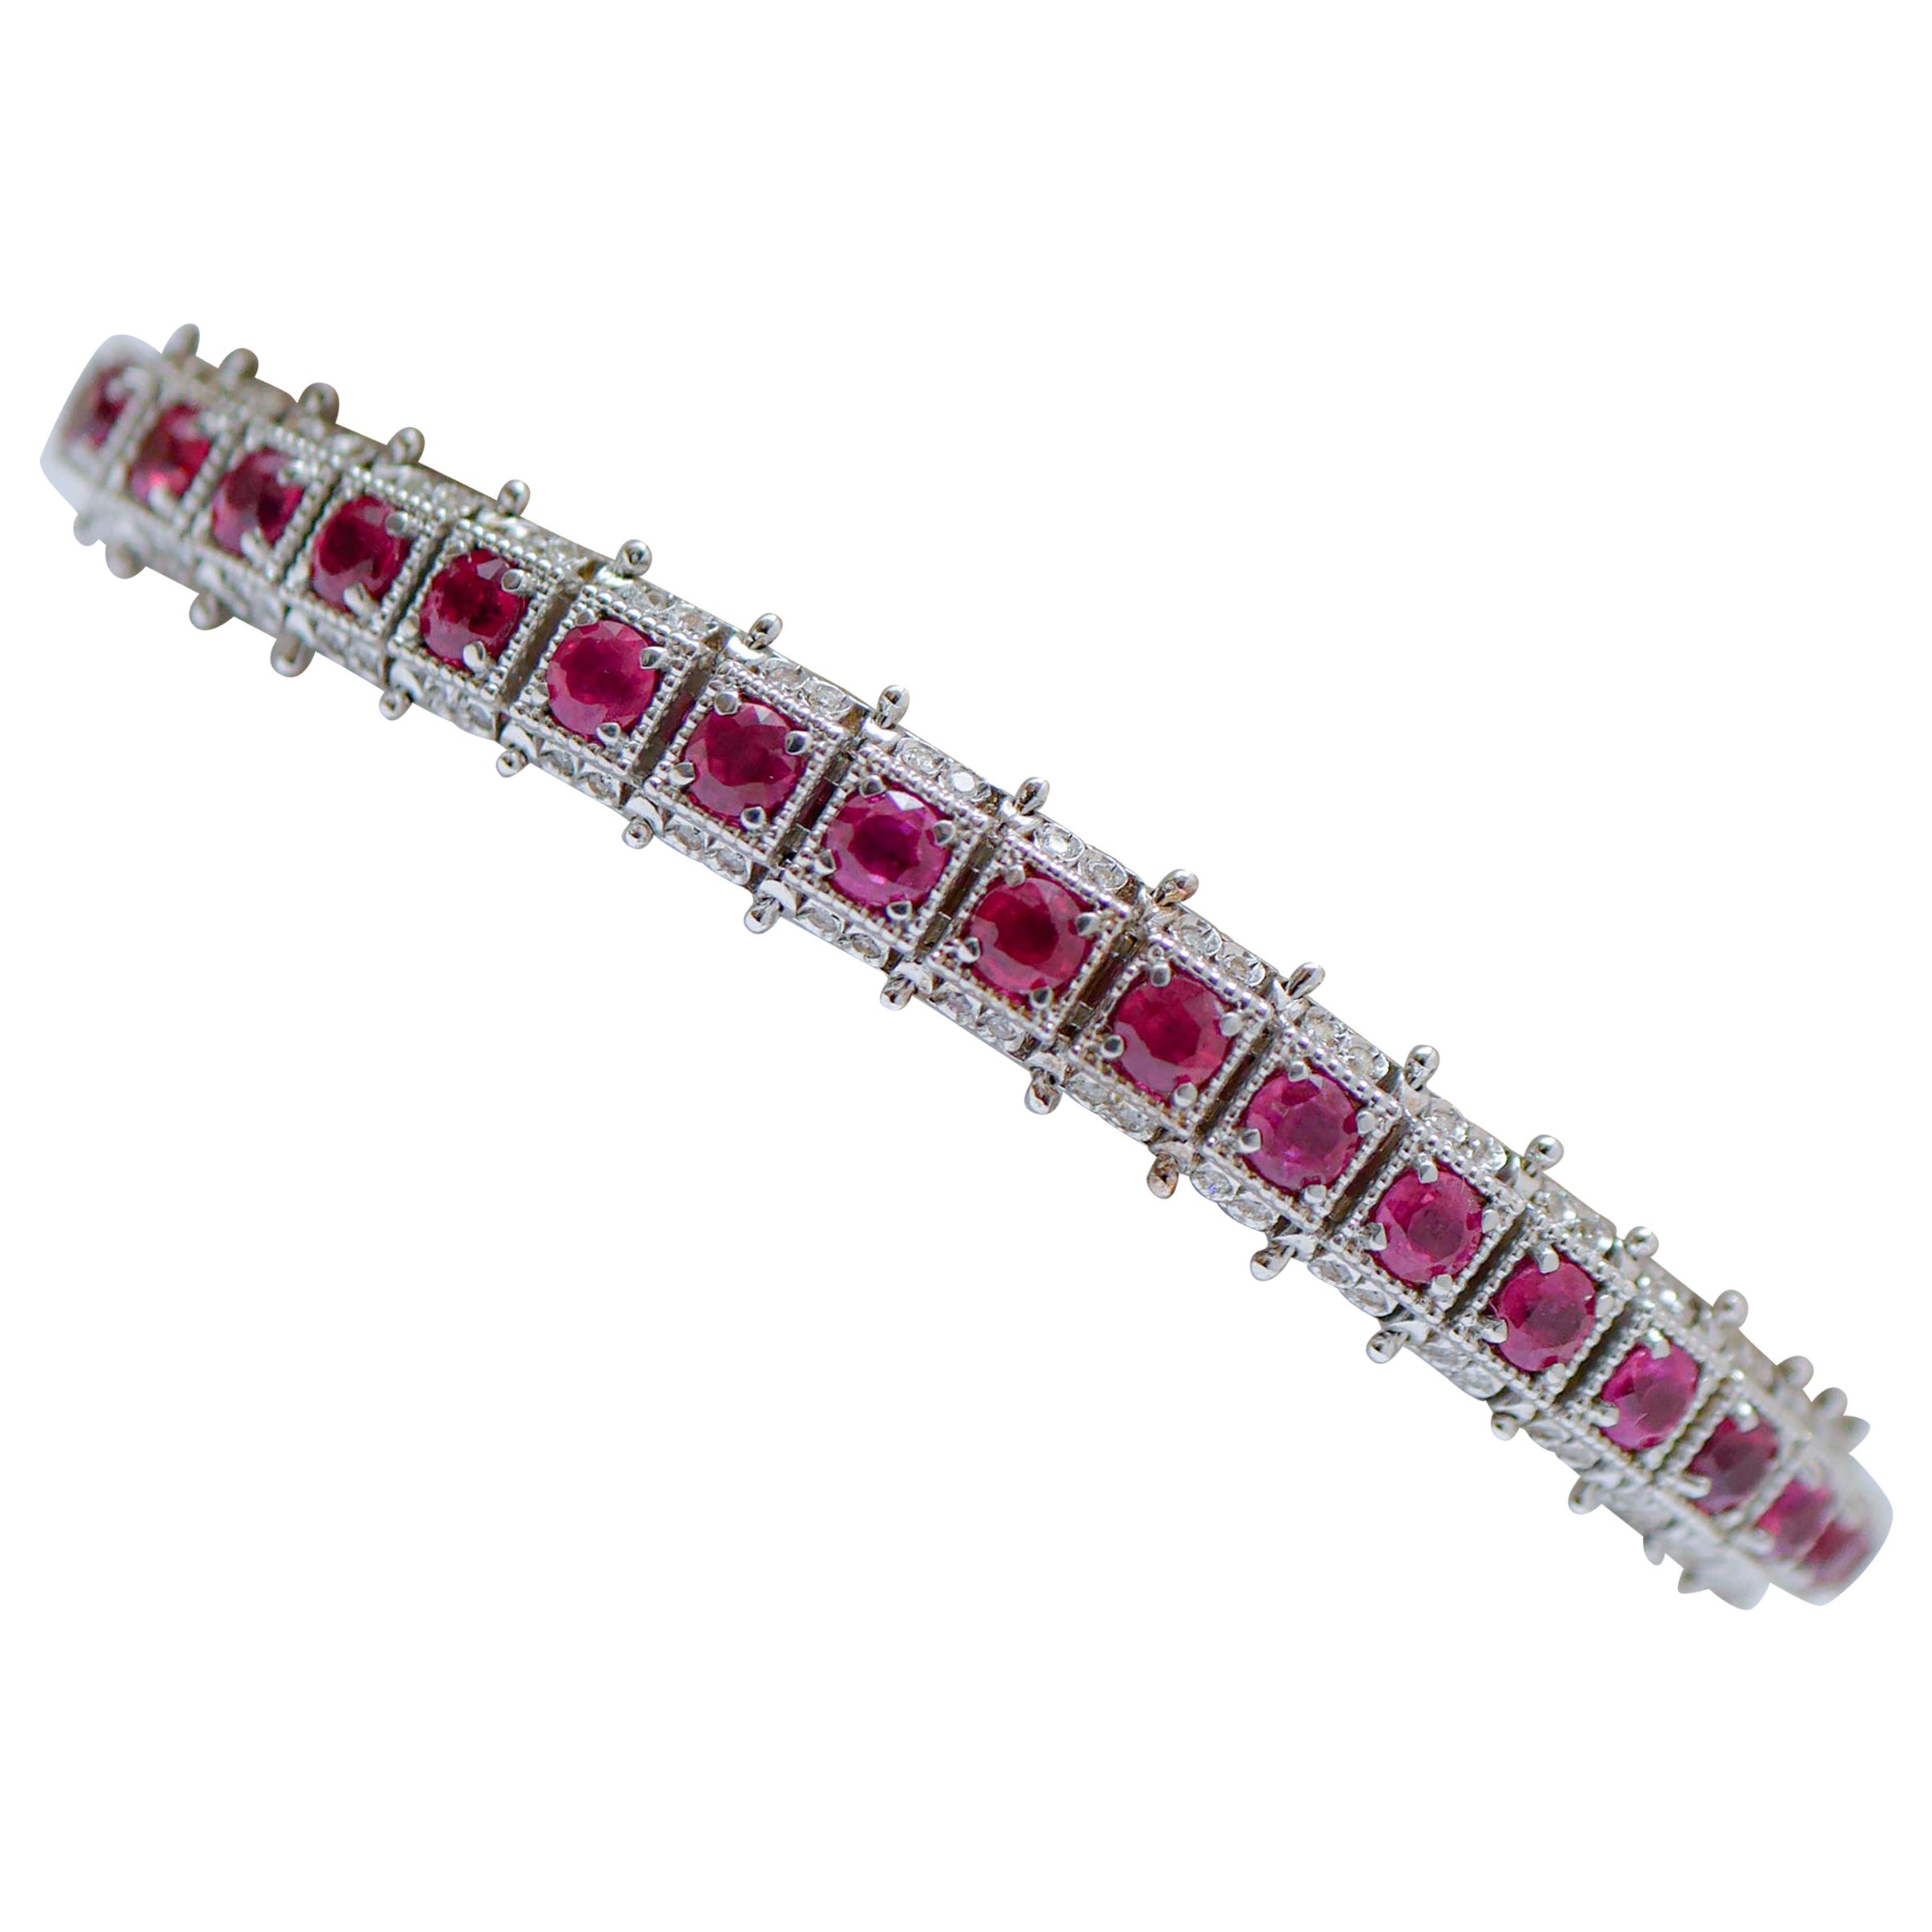 Rubies, Diamonds, Rose Gold and Silver Bracelet.